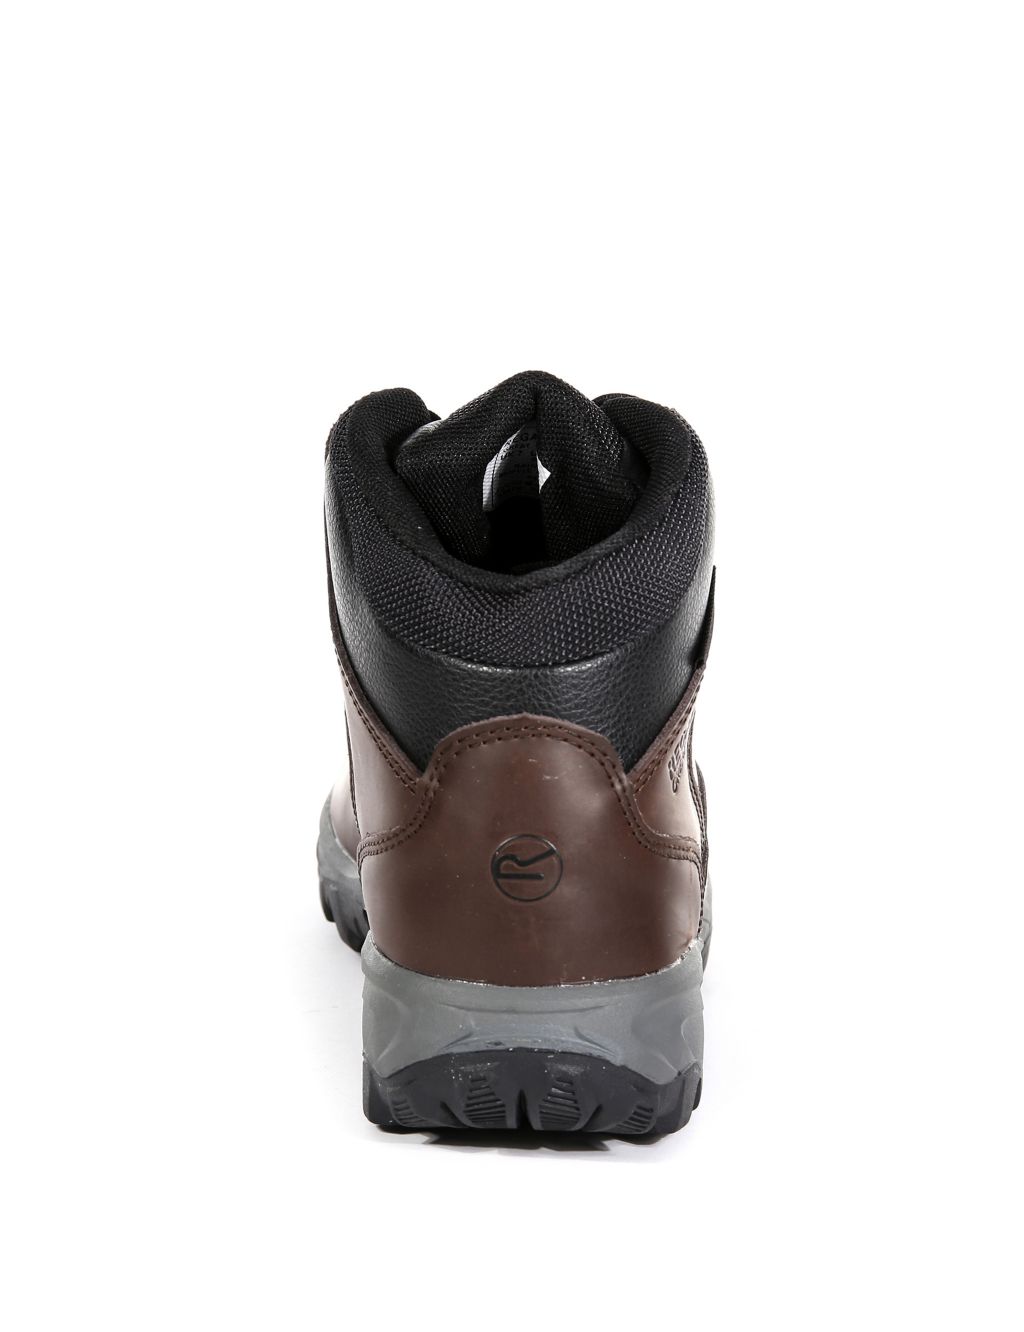 Bainsford Leather Waterproof Walking Boots image 3